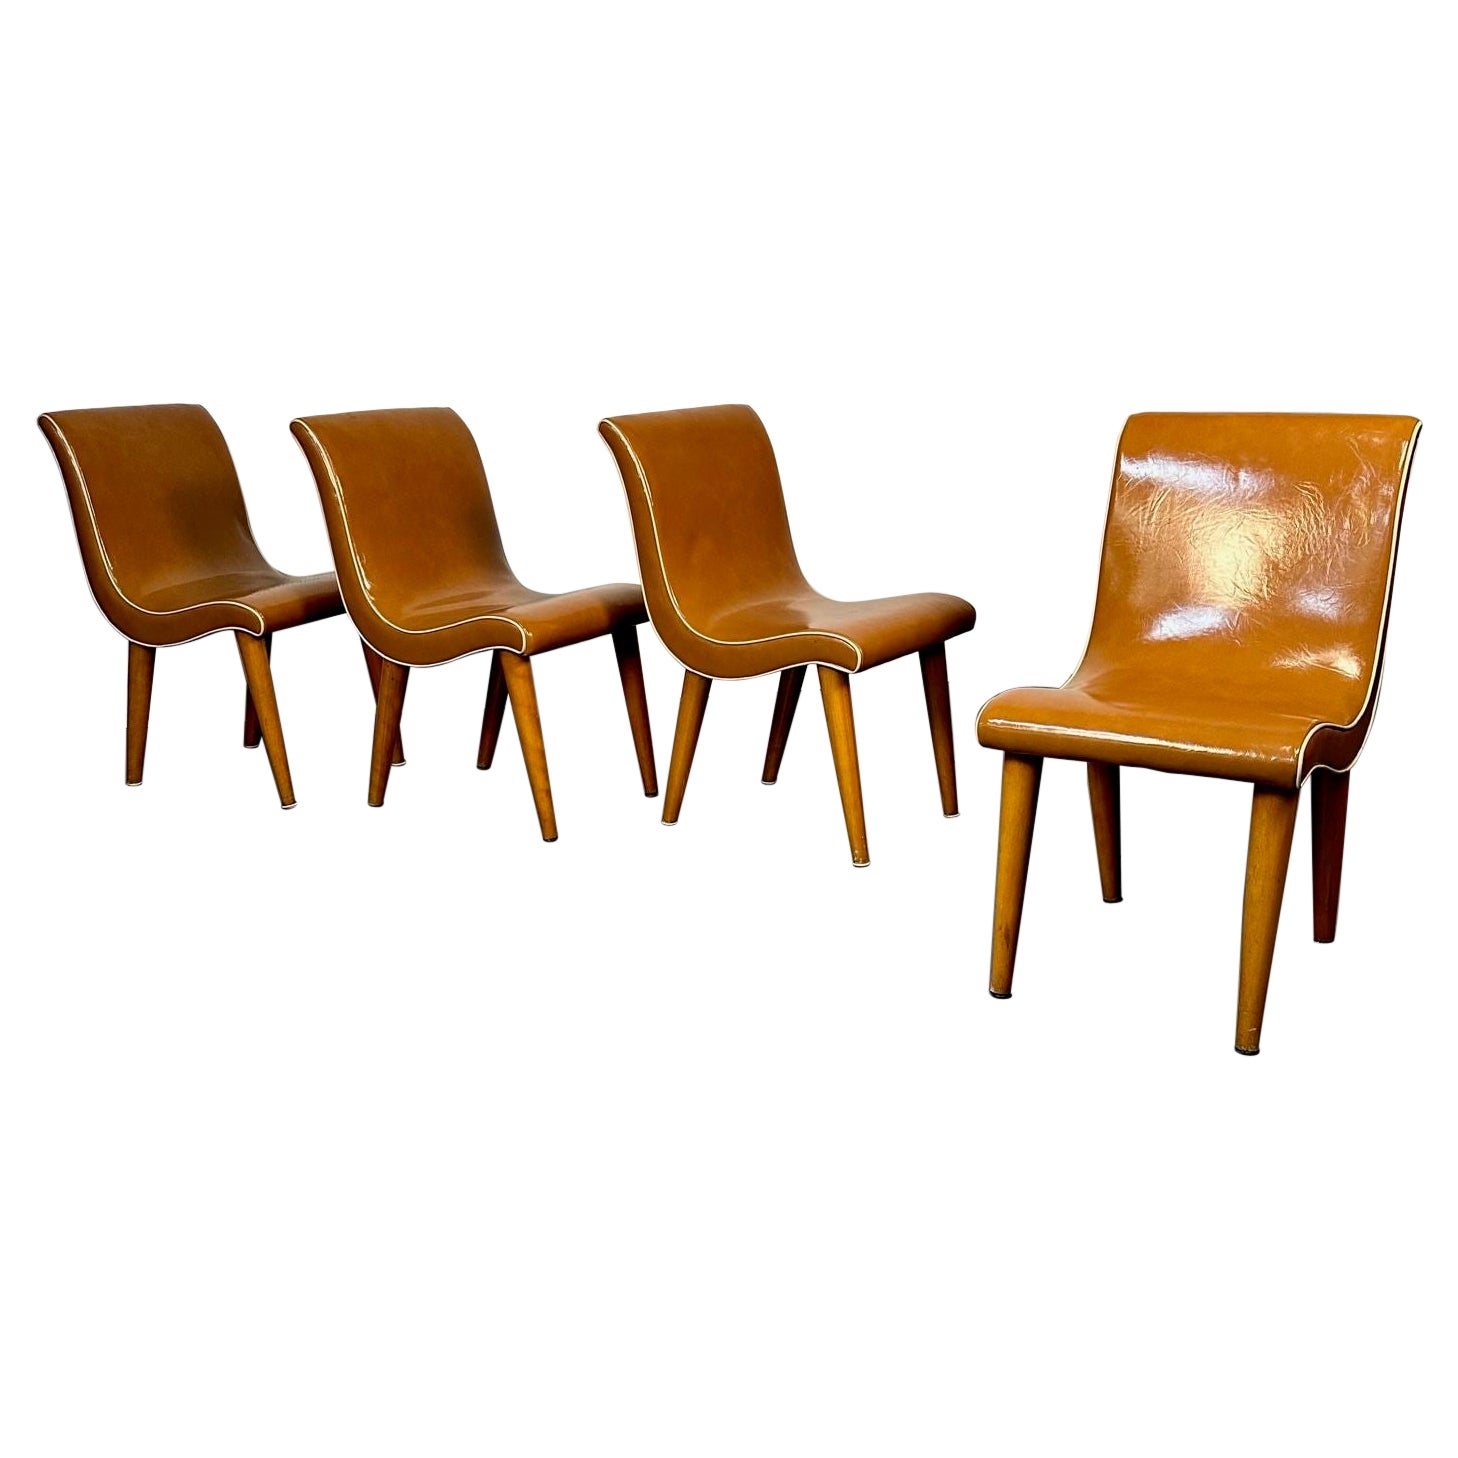 Four American Mid-Century Modern Curvy Dining / Side Chairs by Russel Wright